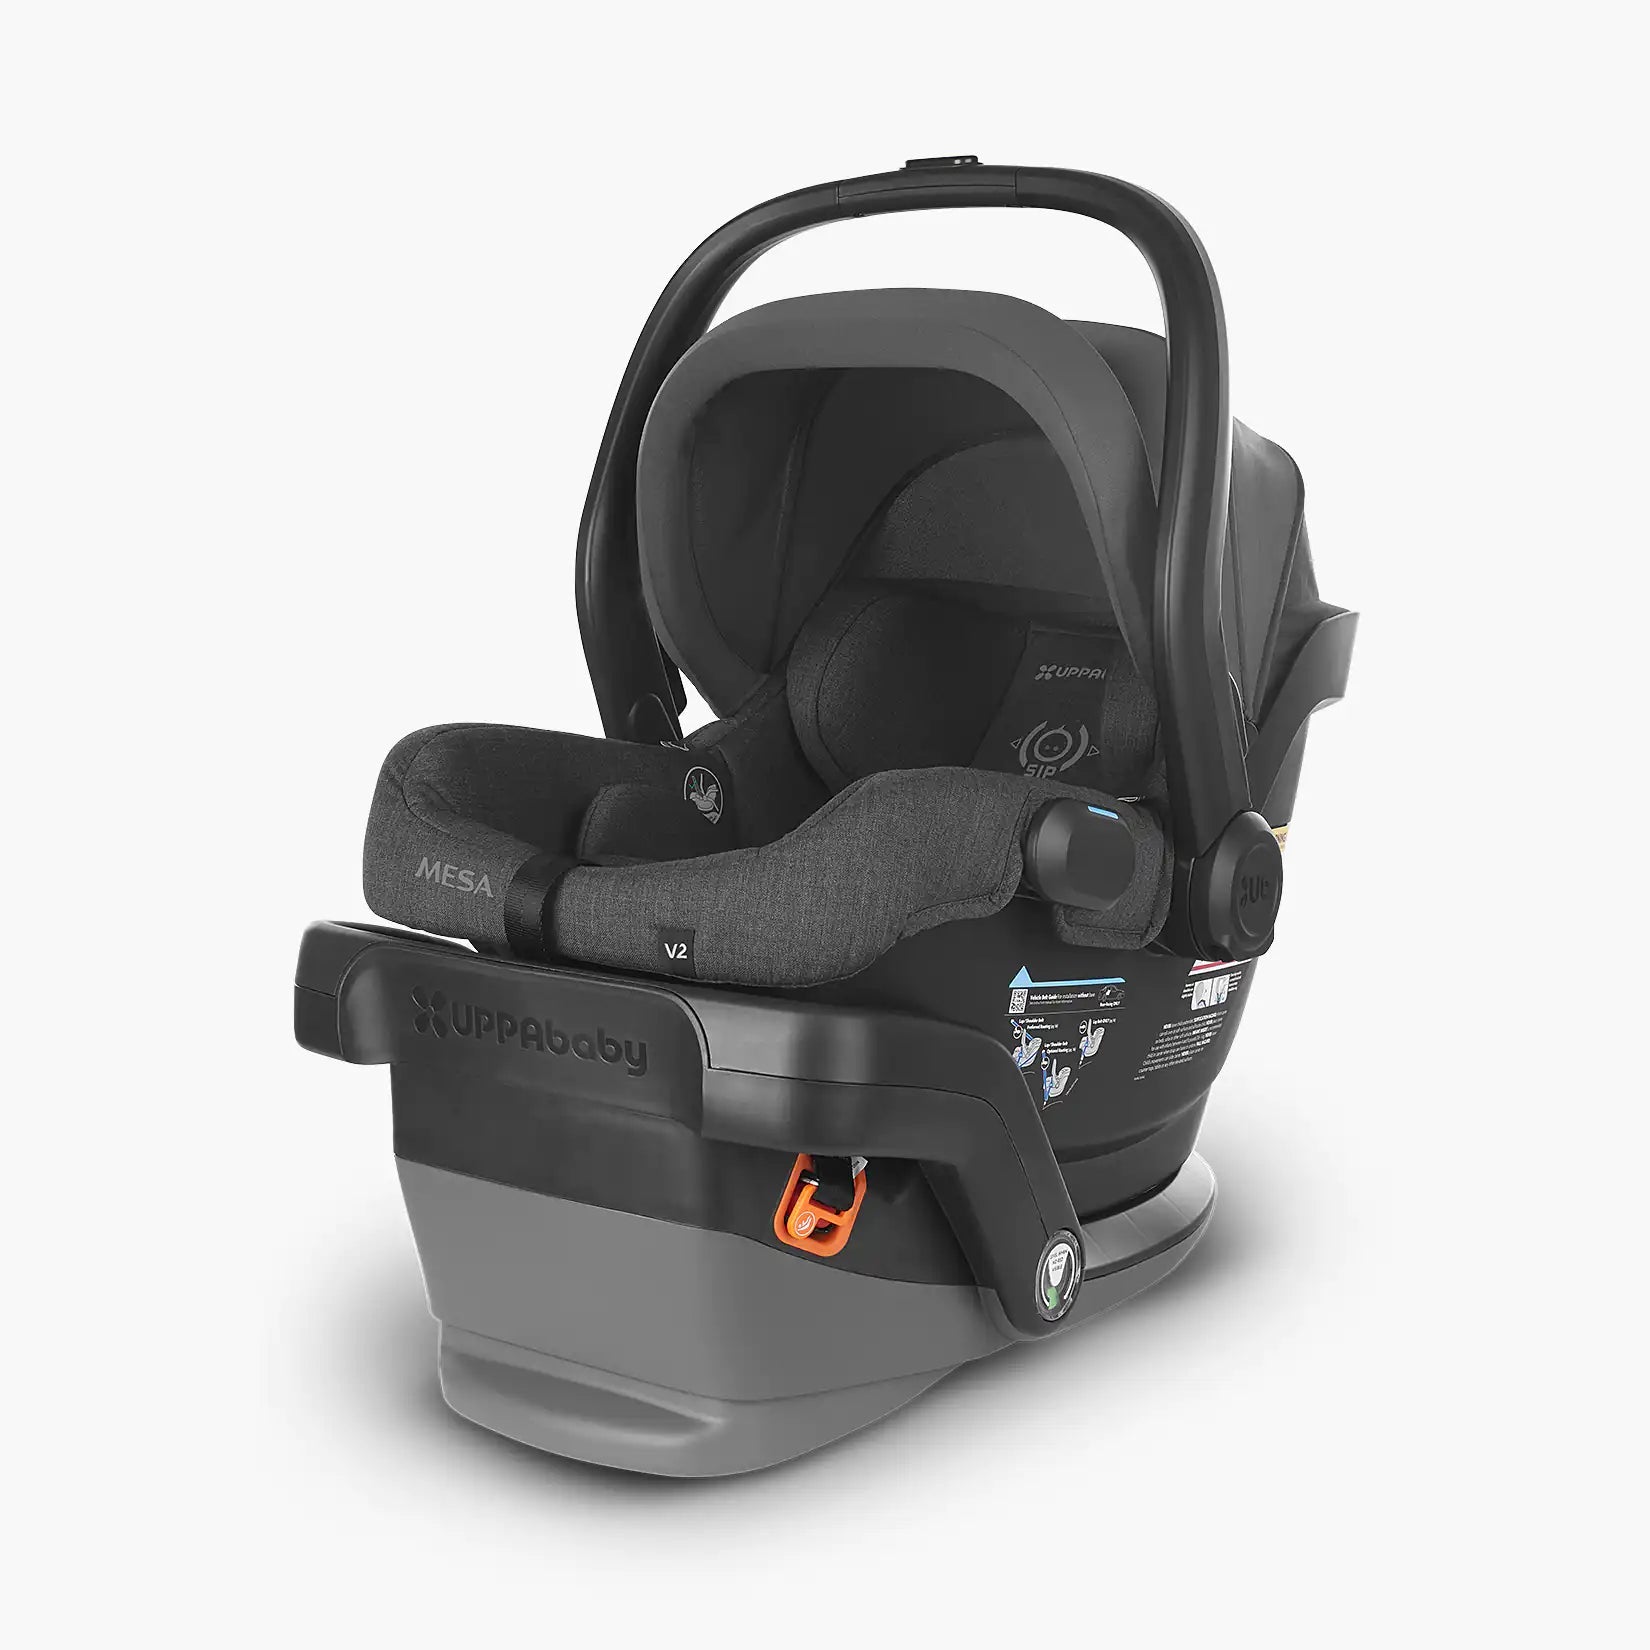 UPPAbaby MESA V2 Infant Carseat in Greyson